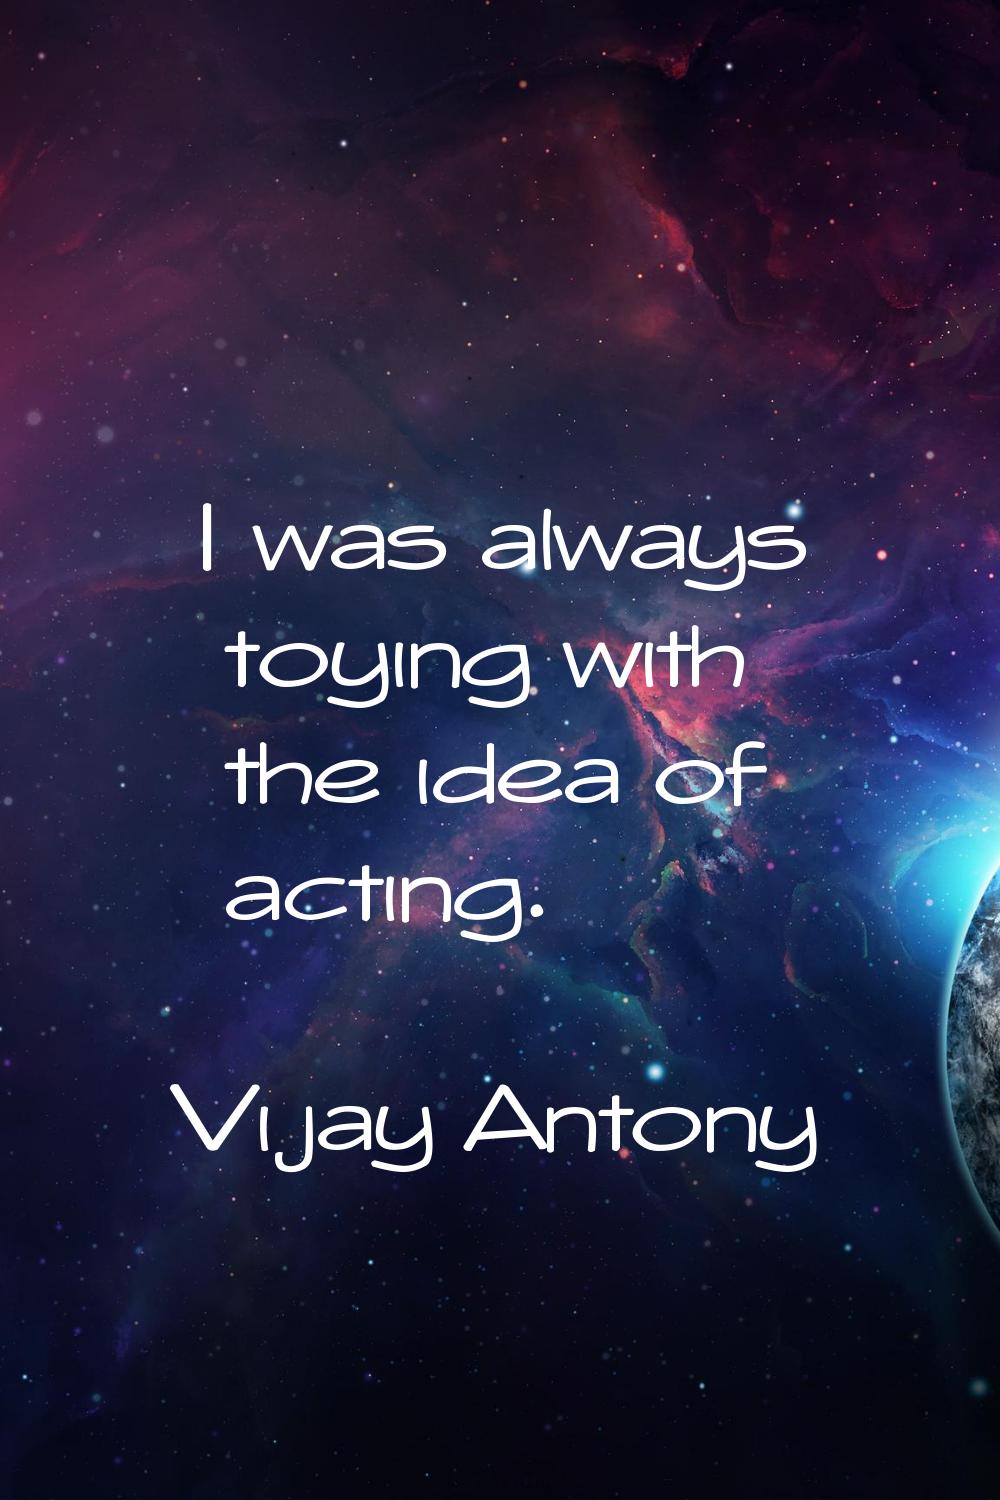 I was always toying with the idea of acting.